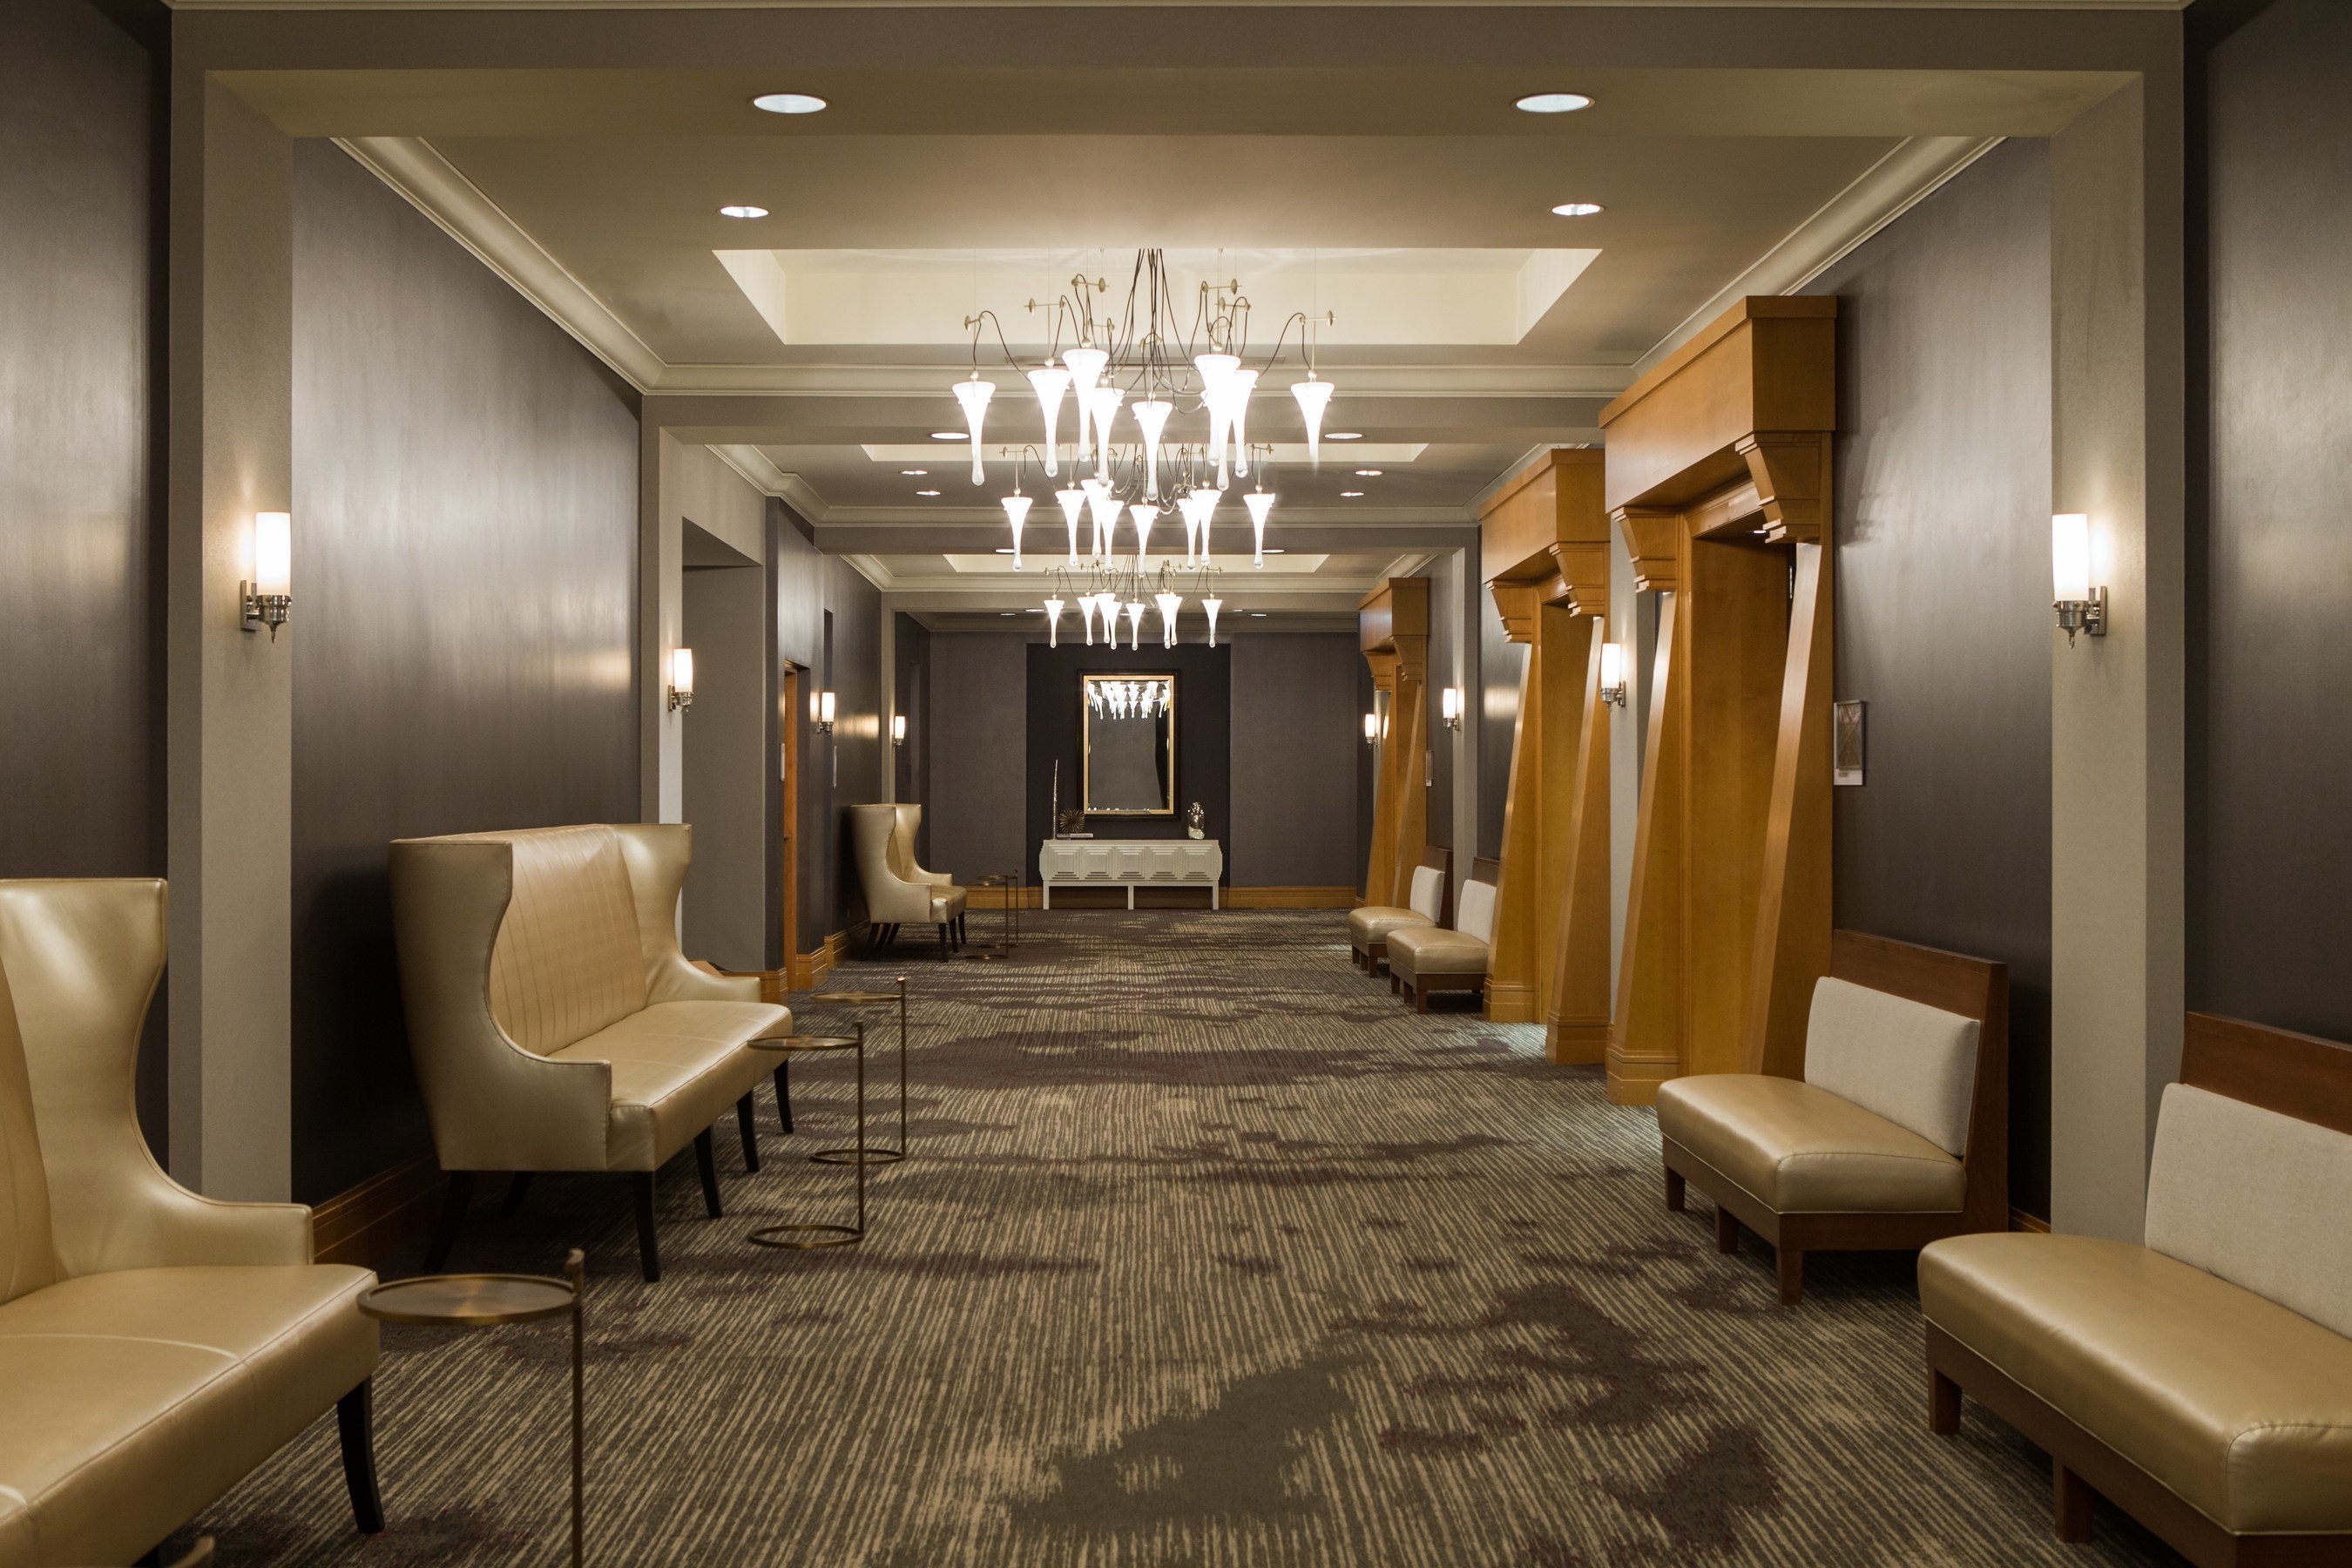 Newly Renovated Interiors at the Chicago Renaissance O'Hare Suites Hotel